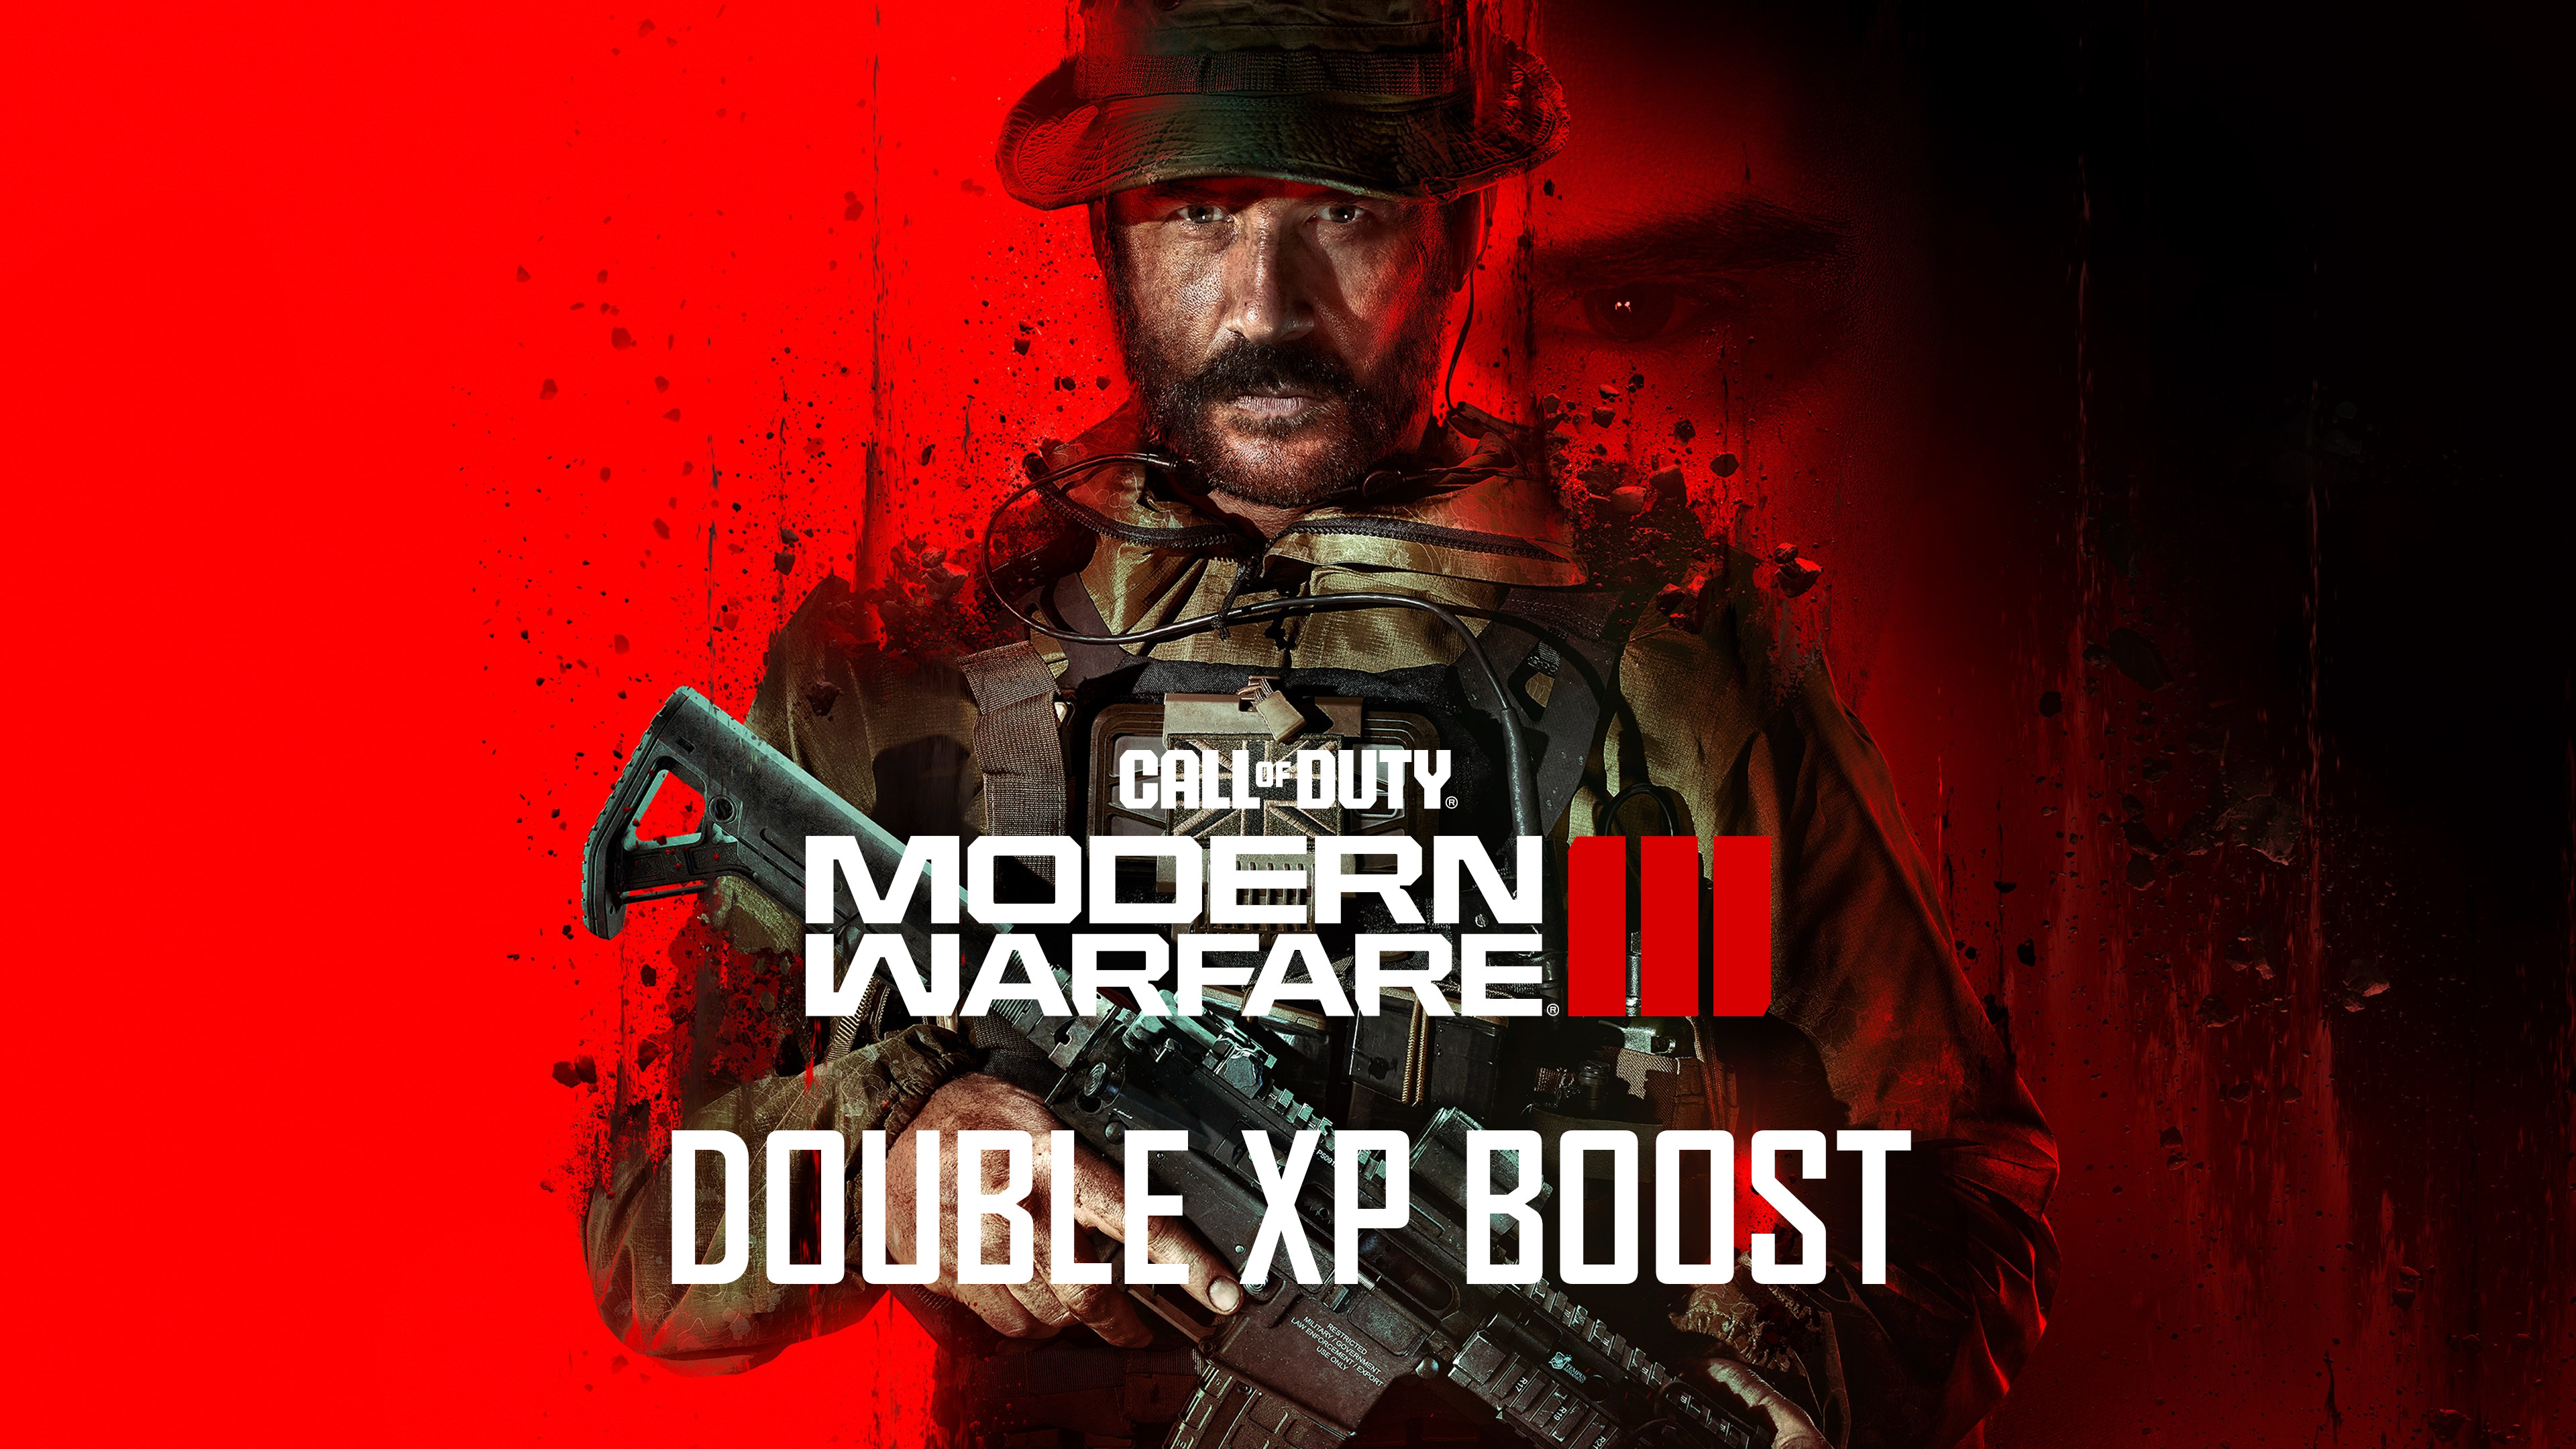 Call of Duty: Modern Warfare III - 3 Hours Double XP Boost PC/PS4/PS5/XBOX One/Series X|S CD Key $1.93